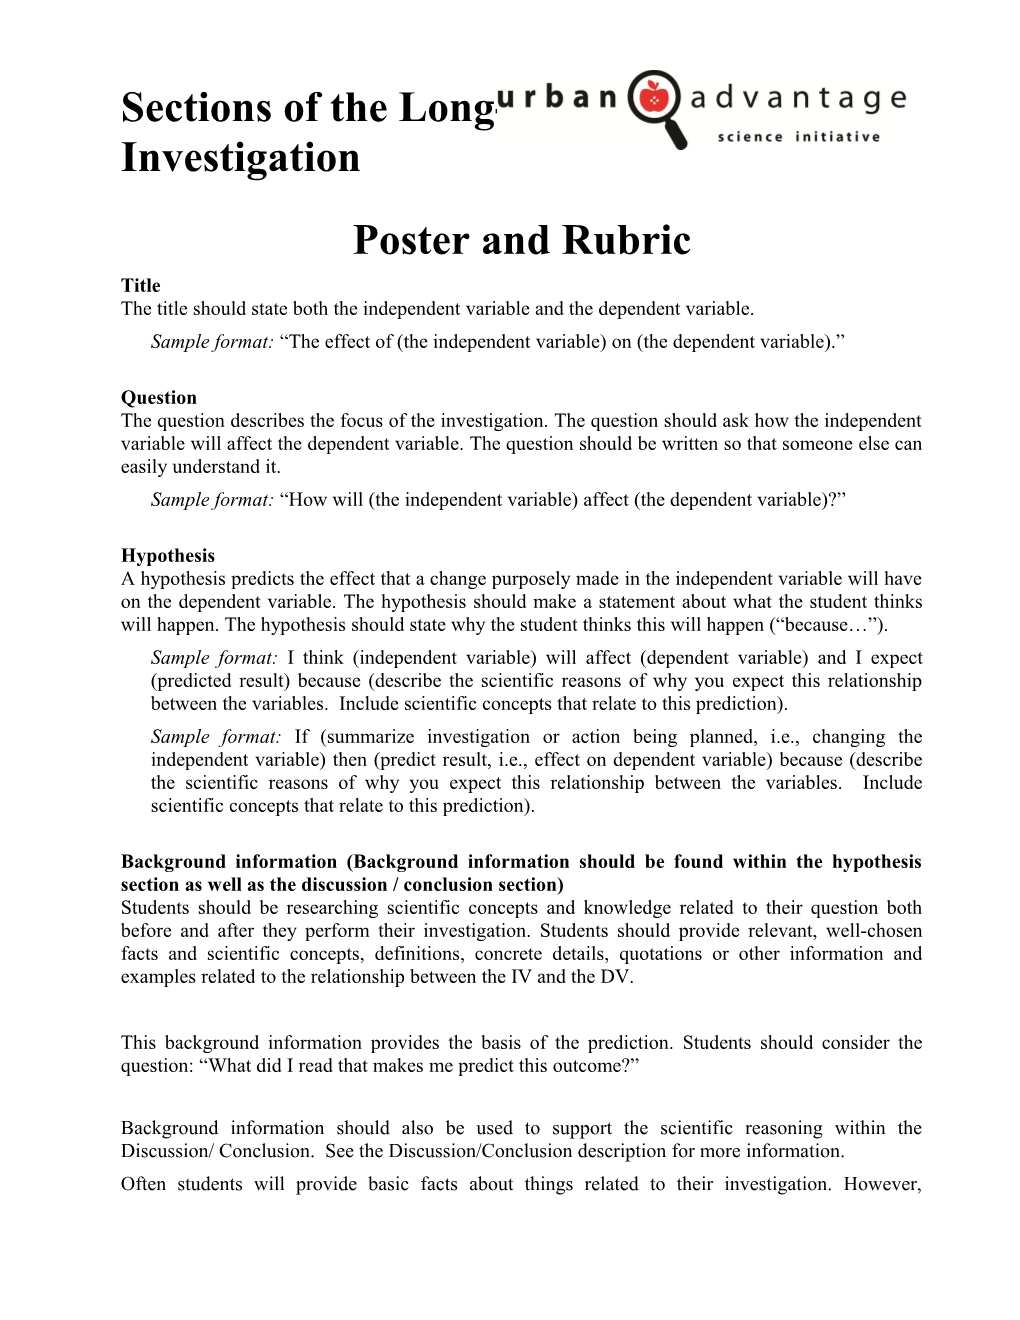 Poster and Rubric